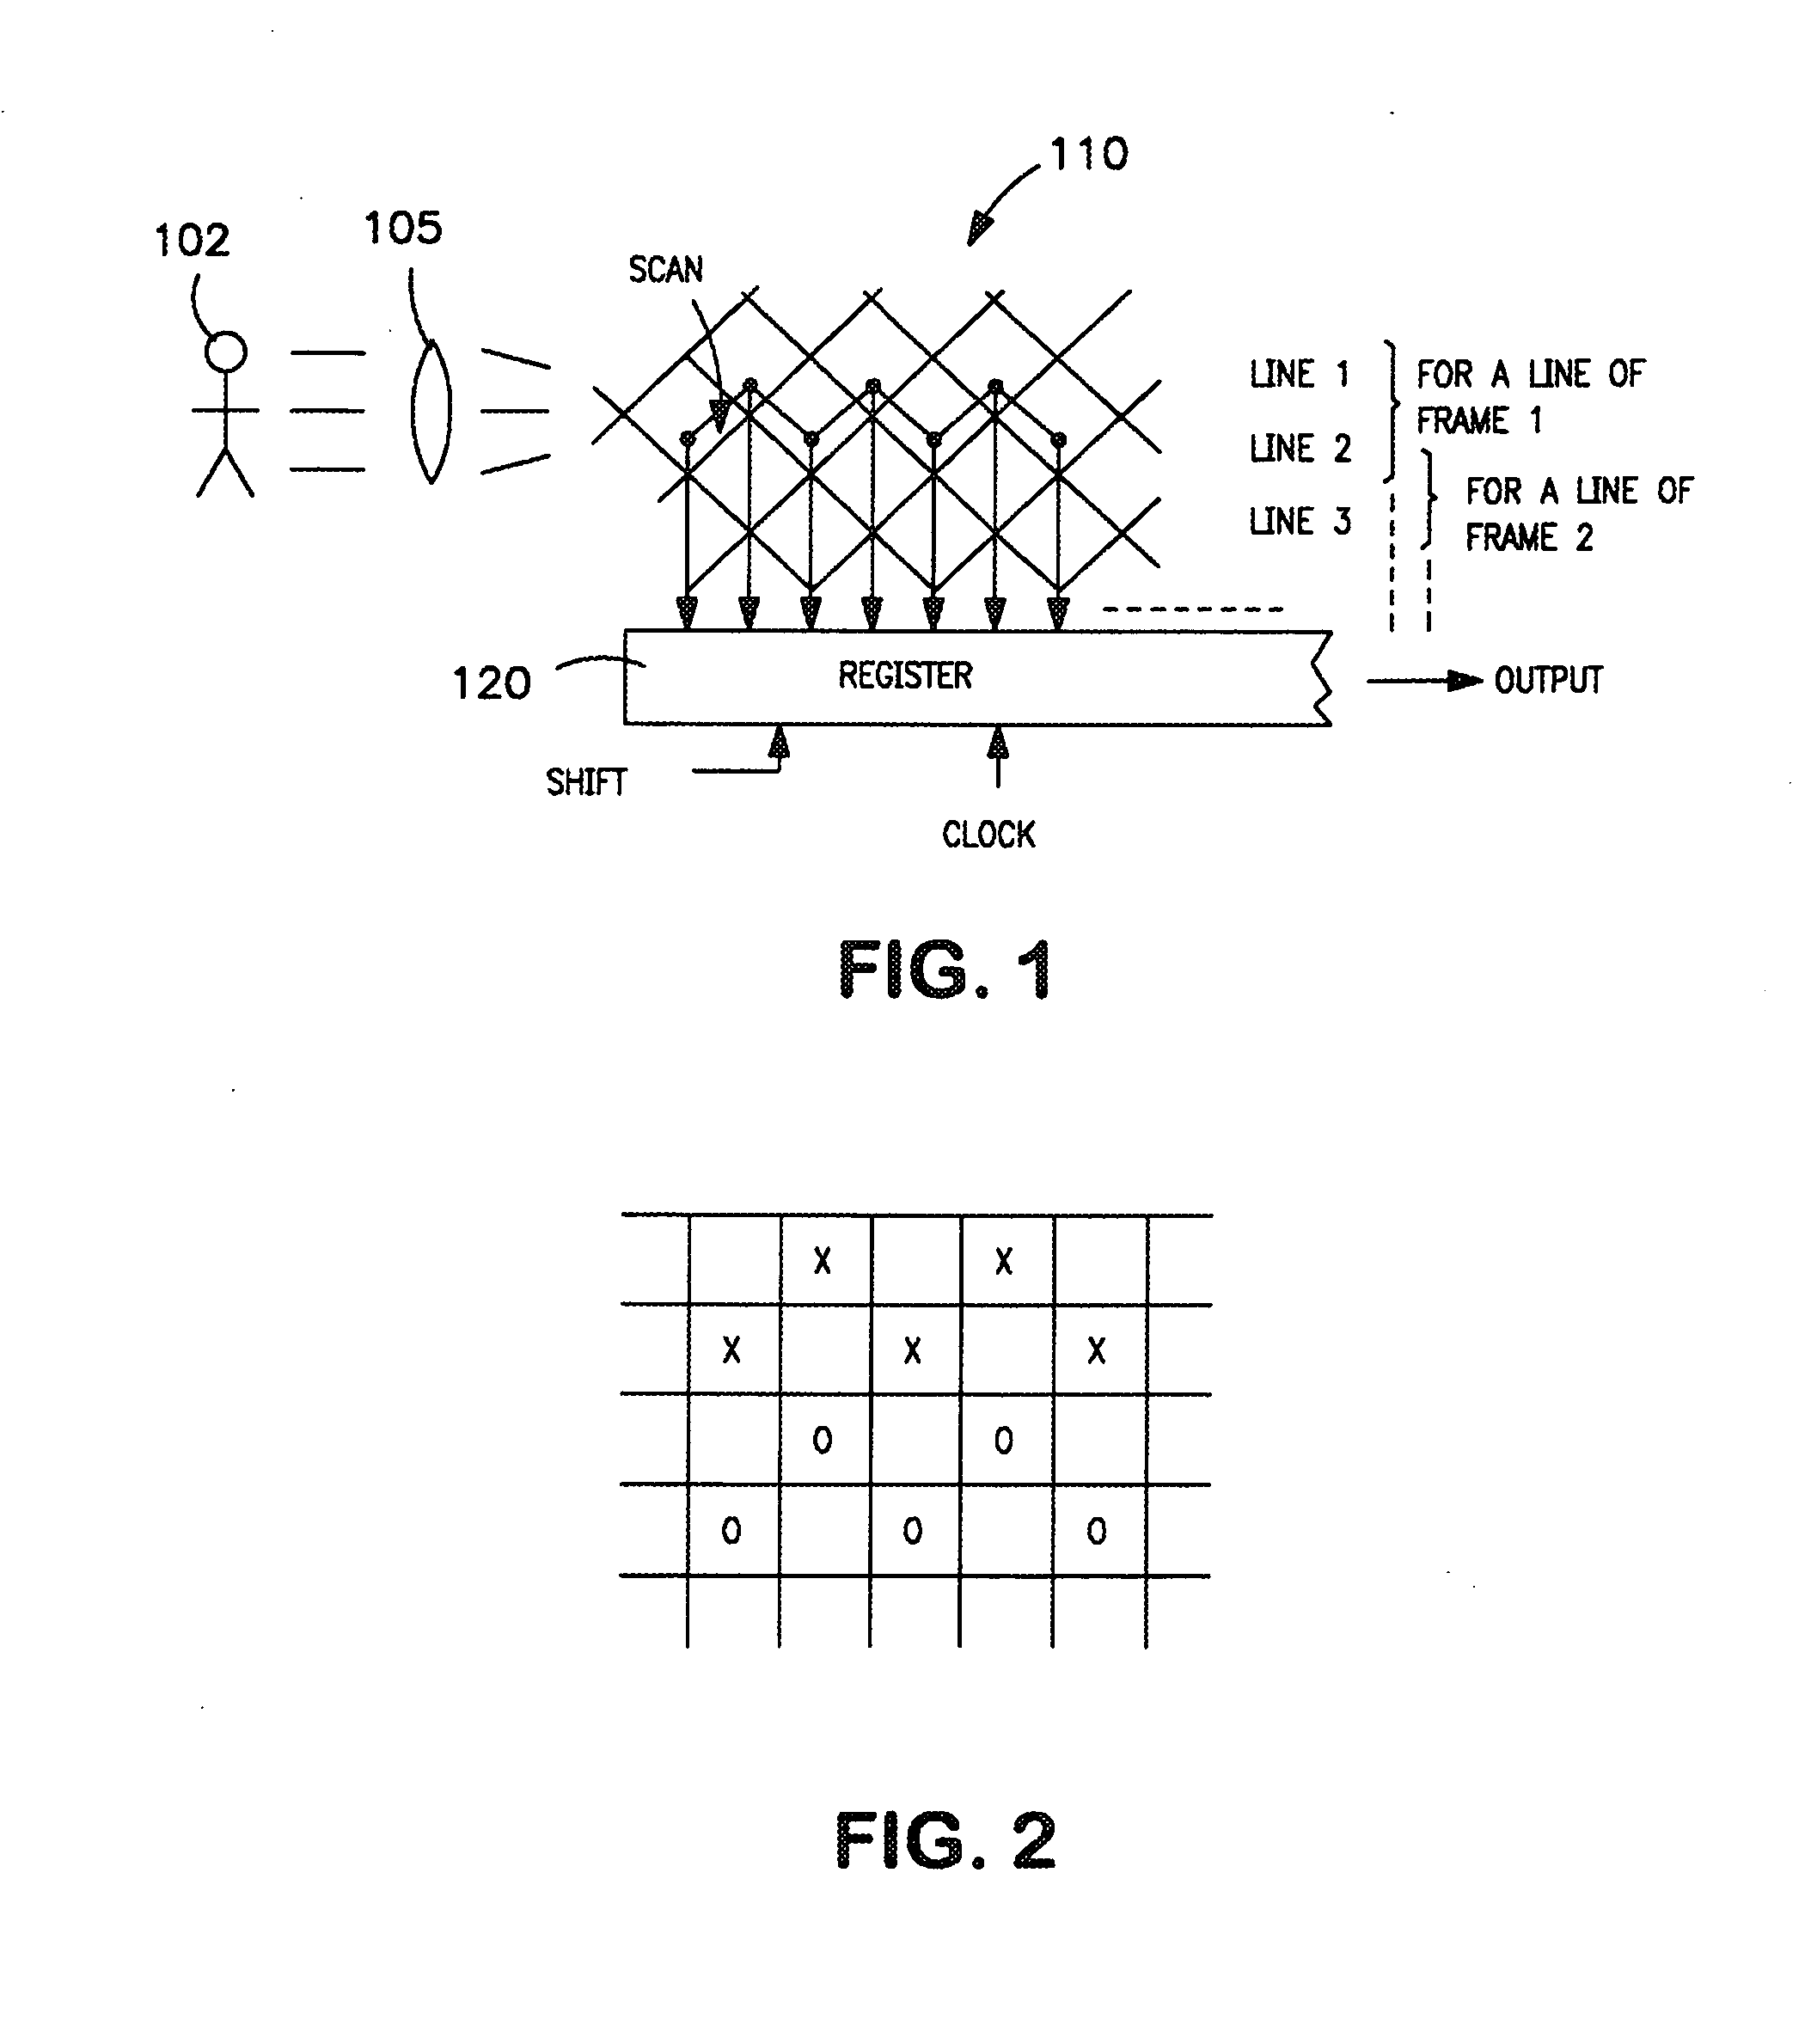 Apparatus and method for producing video signals